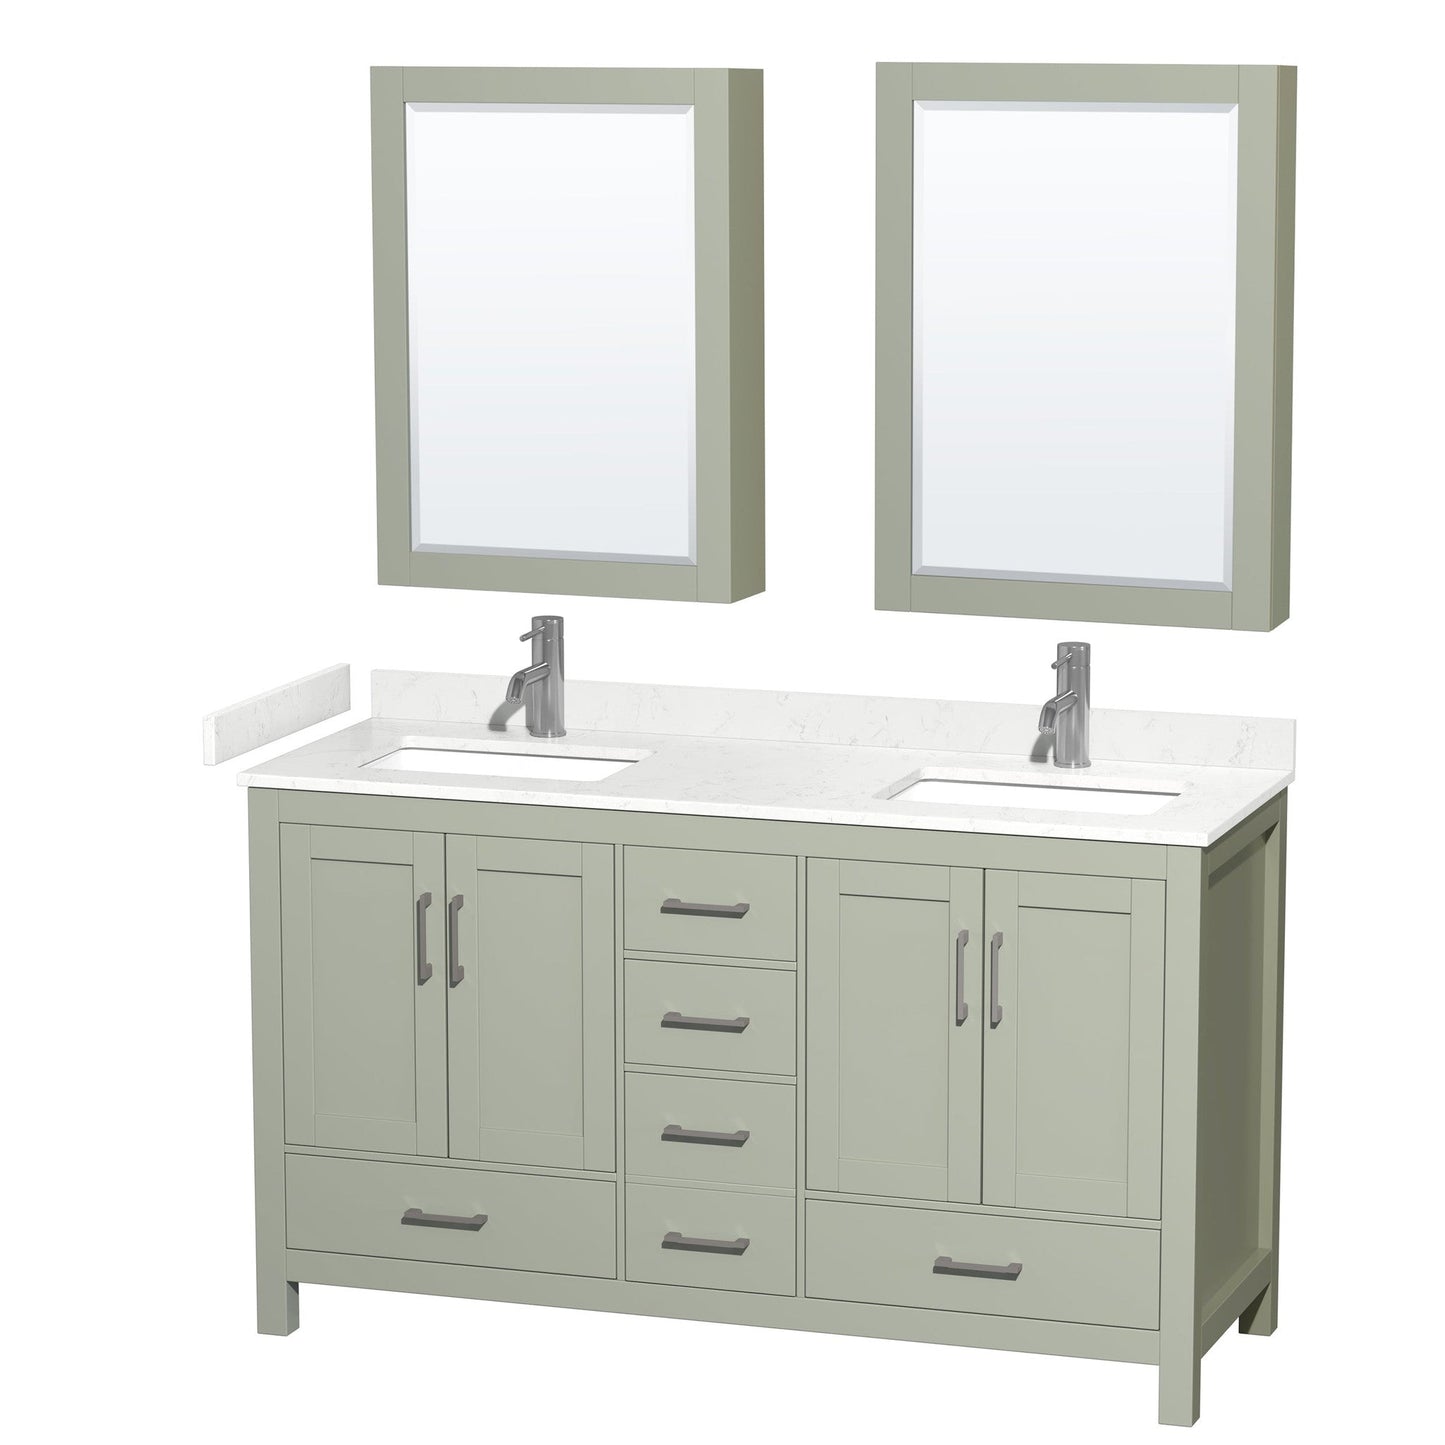 Sheffield 60" Double Bathroom Vanity in Light Green, Carrara Cultured Marble Countertop, Undermount Square Sinks, Brushed Nickel Trim, Medicine Cabinets